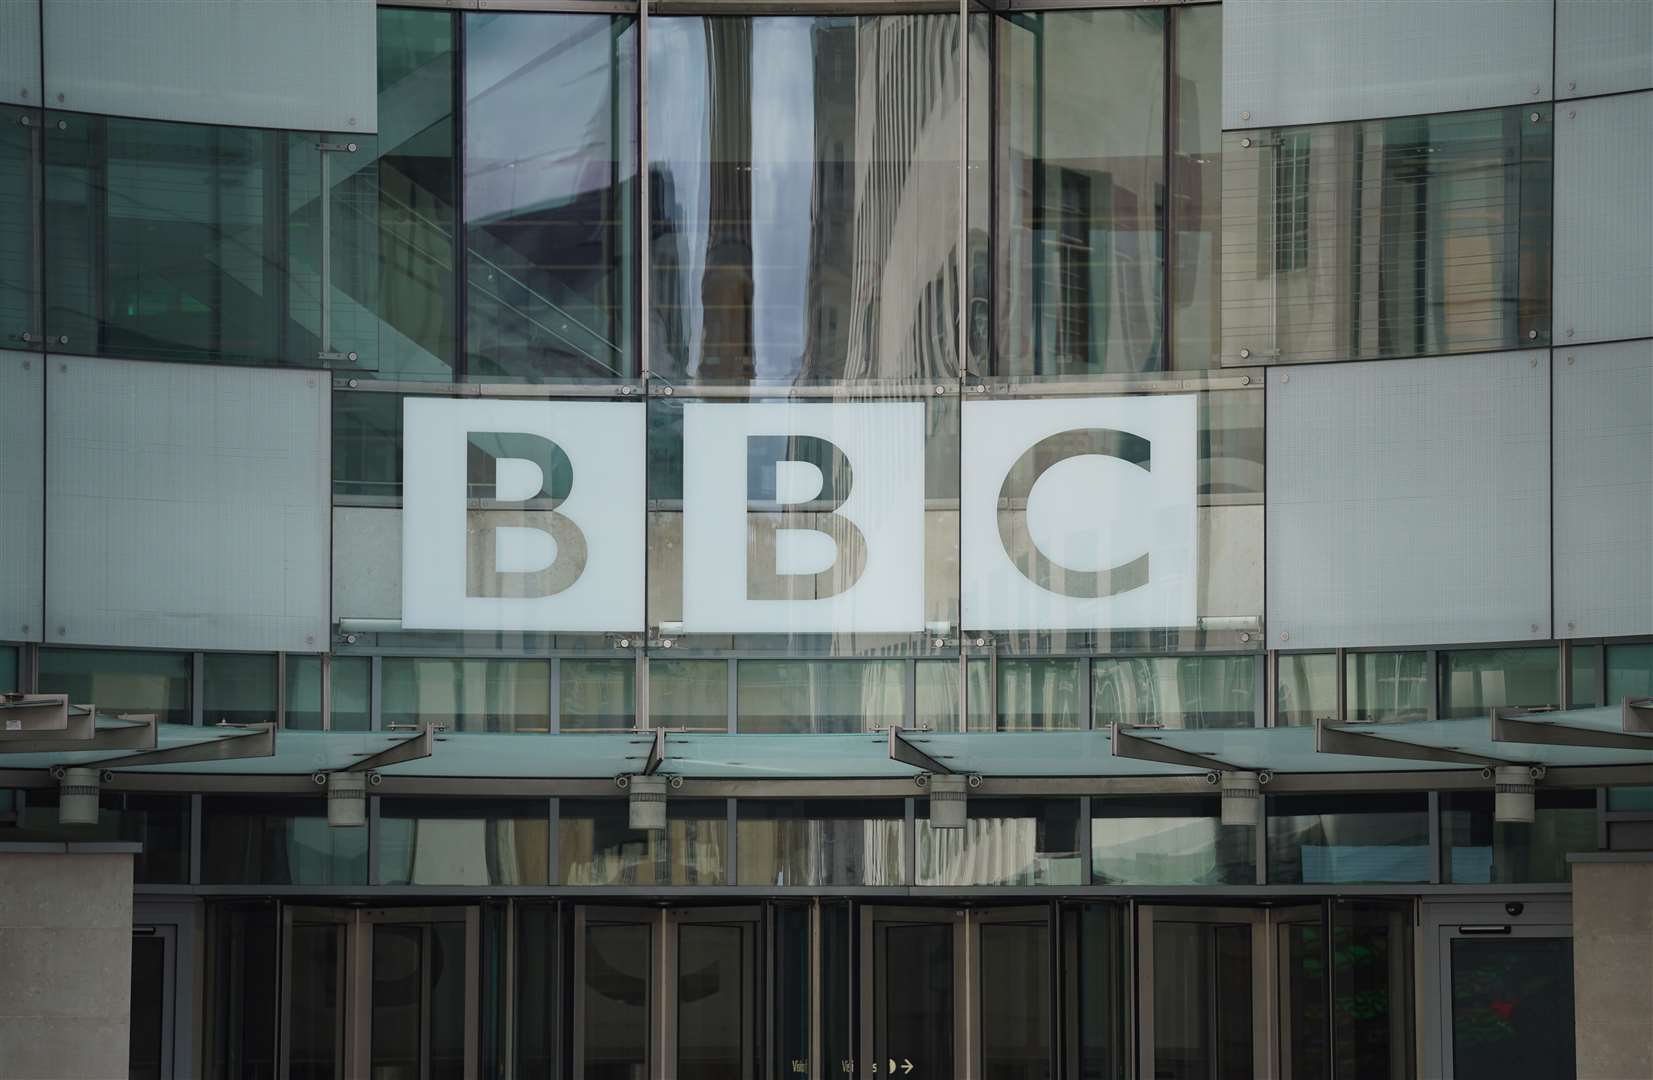 The hearing was told the BBC intended to use the Freedom of Information Act to stop full disclosure of some of the emails (Lucy North/PA)